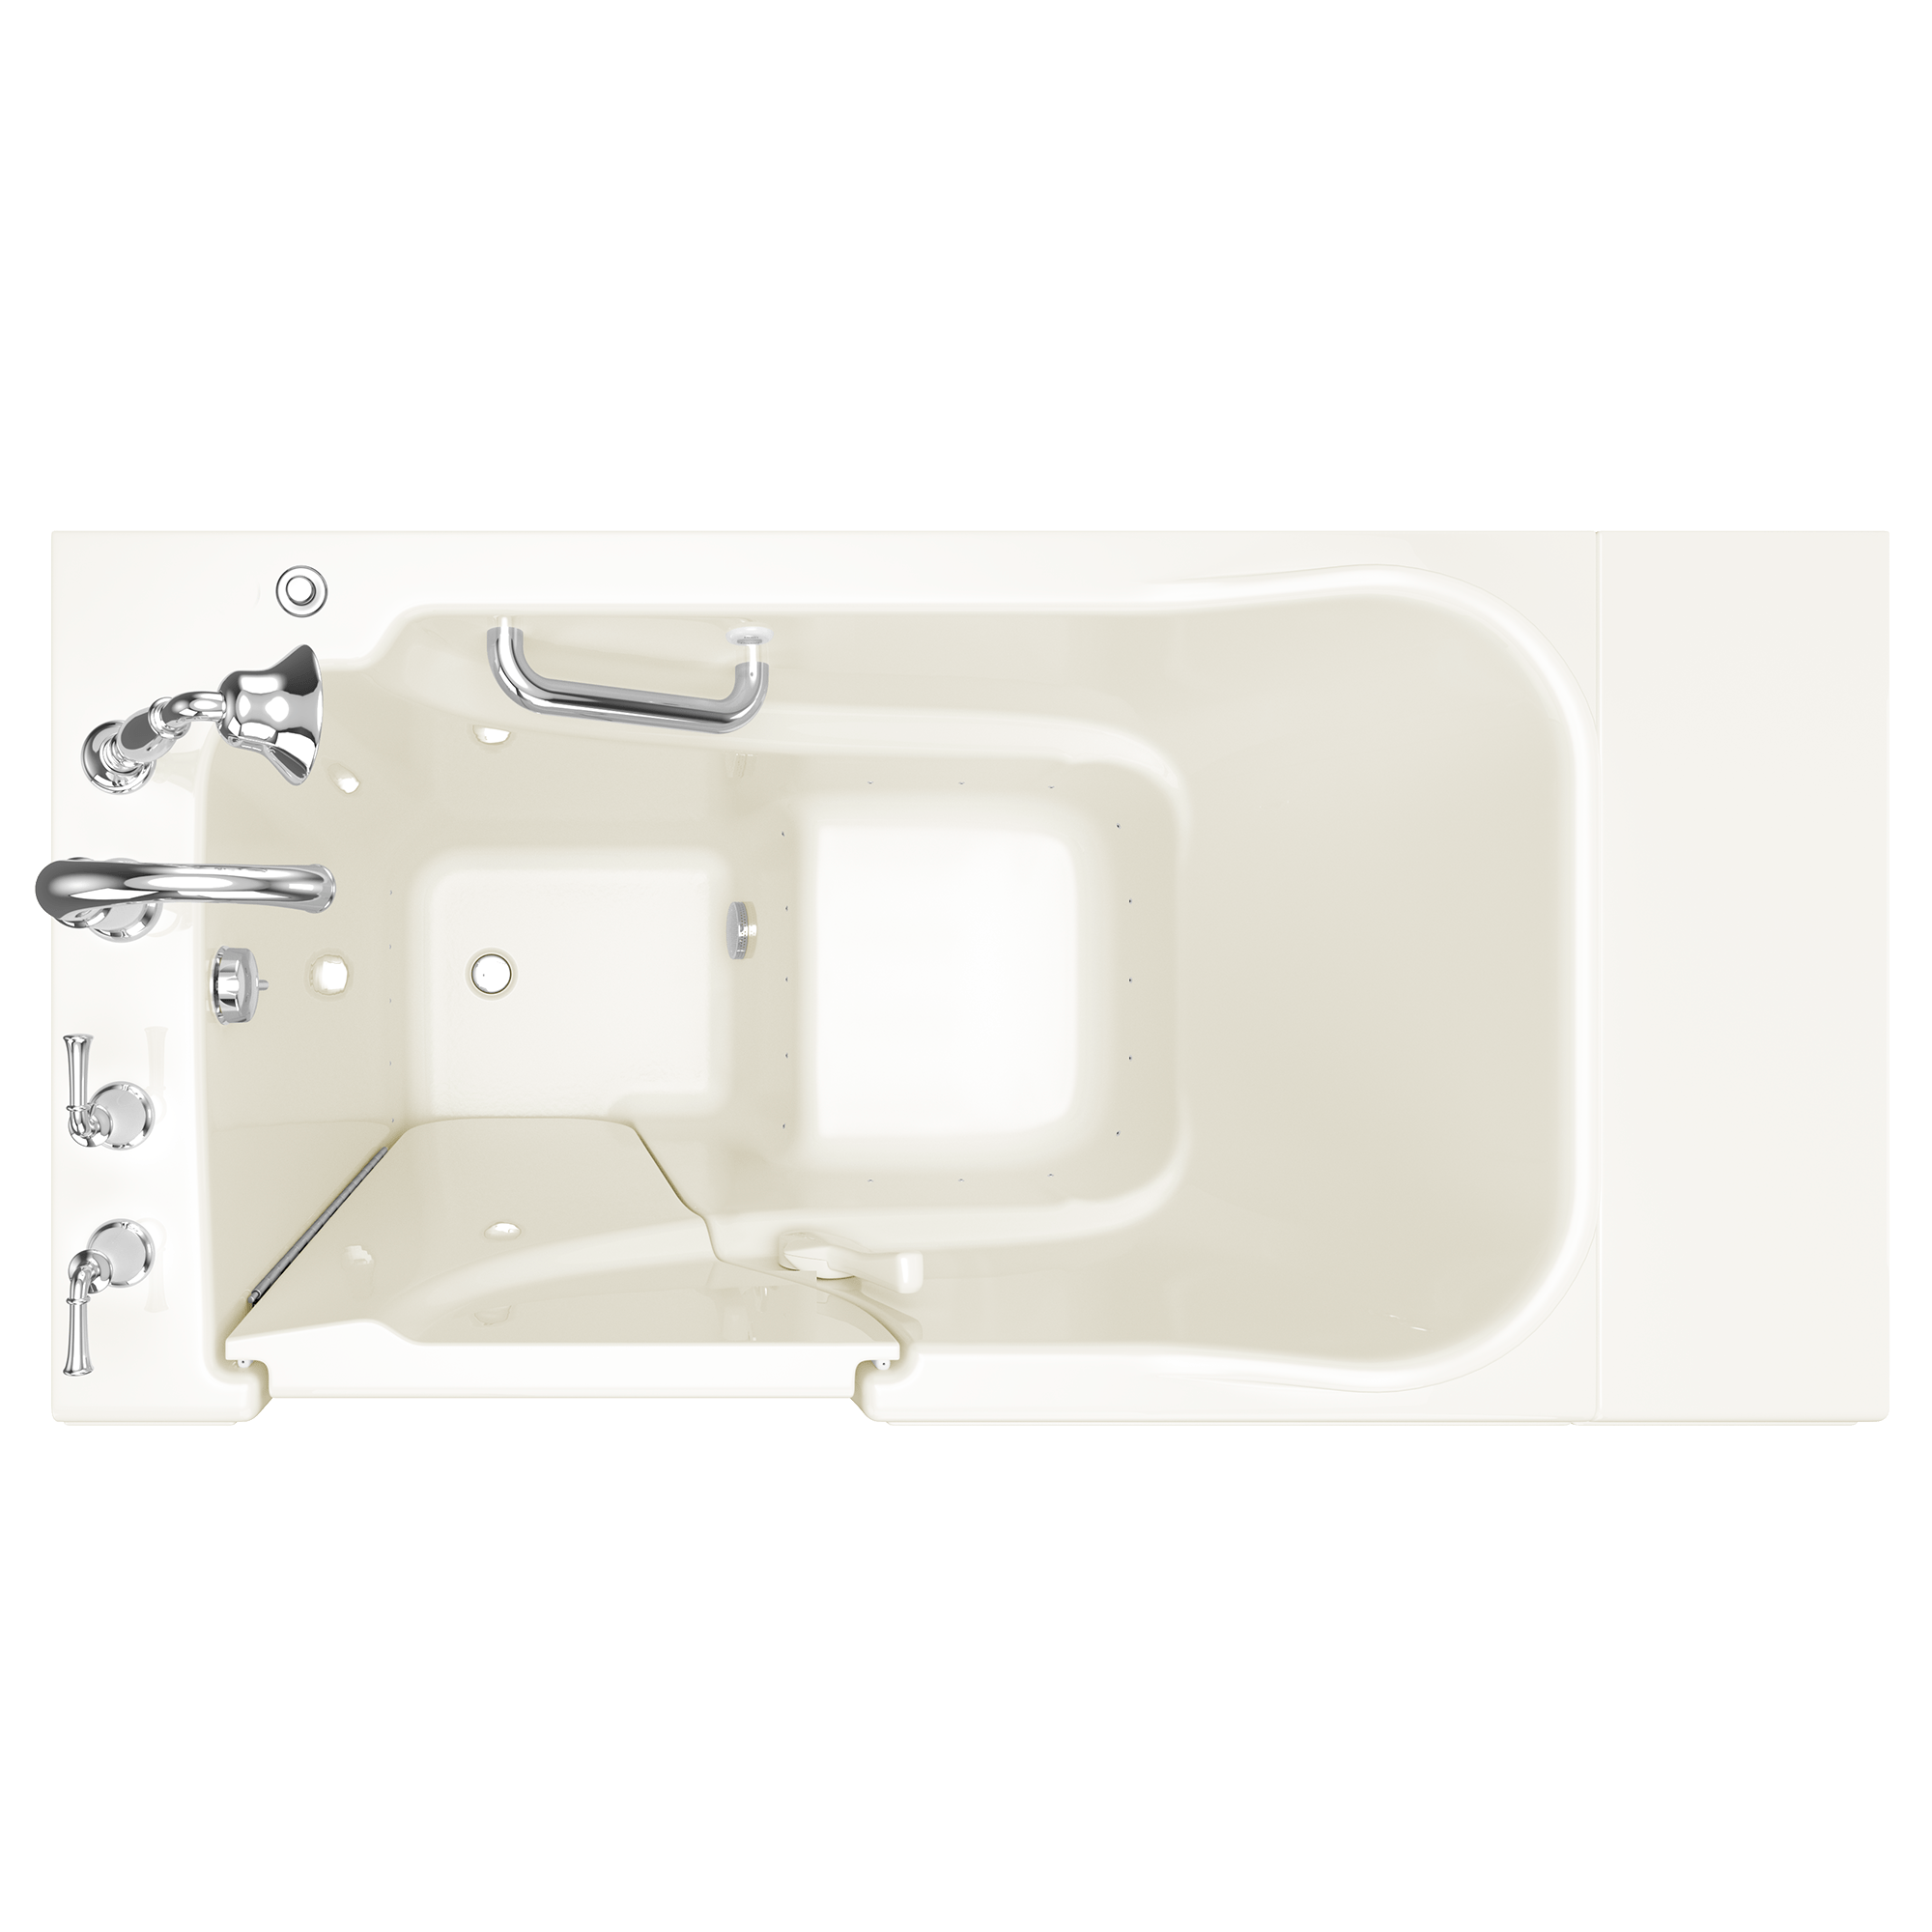 Gelcoat Value Series 30x52 Inch Walk-In Bathtub with Air Spa System - Left Hand Door and Drain